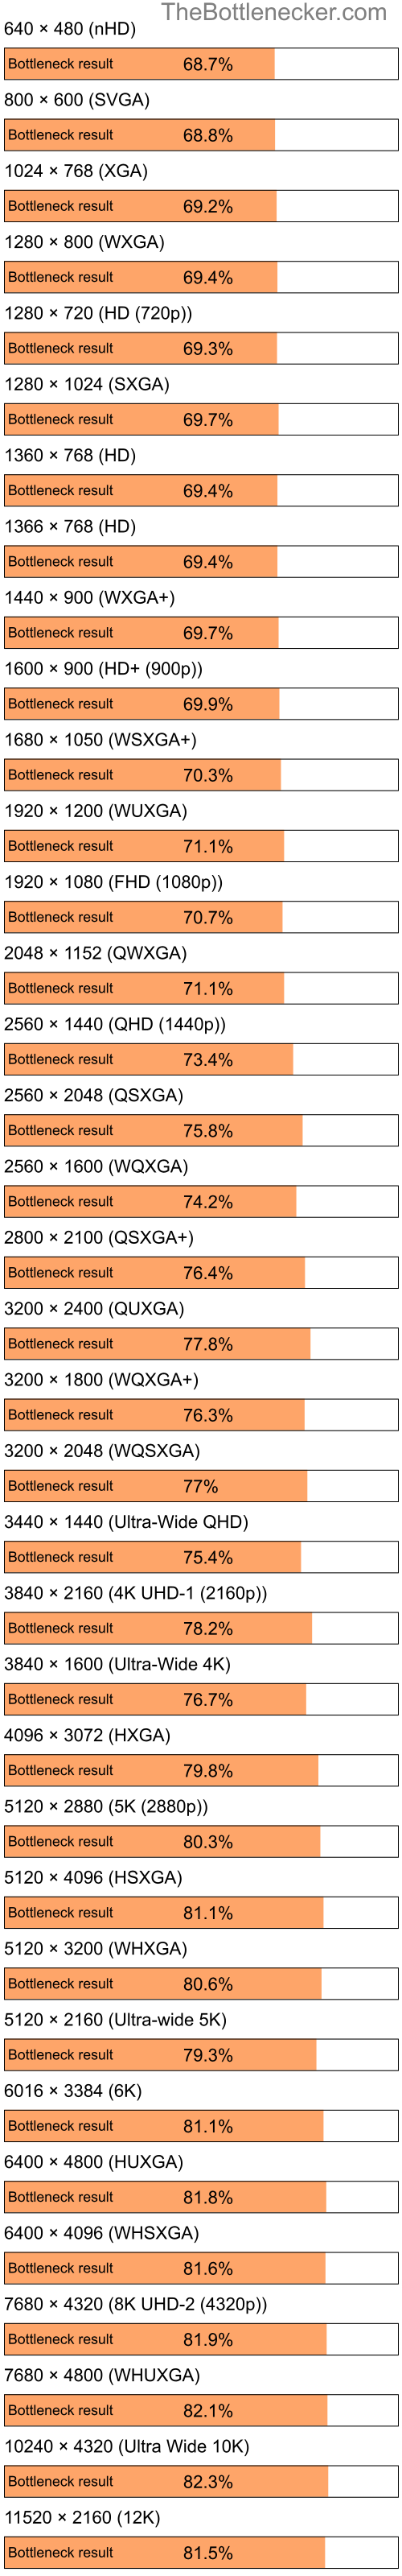 Bottleneck results by resolution for Intel Celeron and NVIDIA Quadro FX 550 in General Tasks